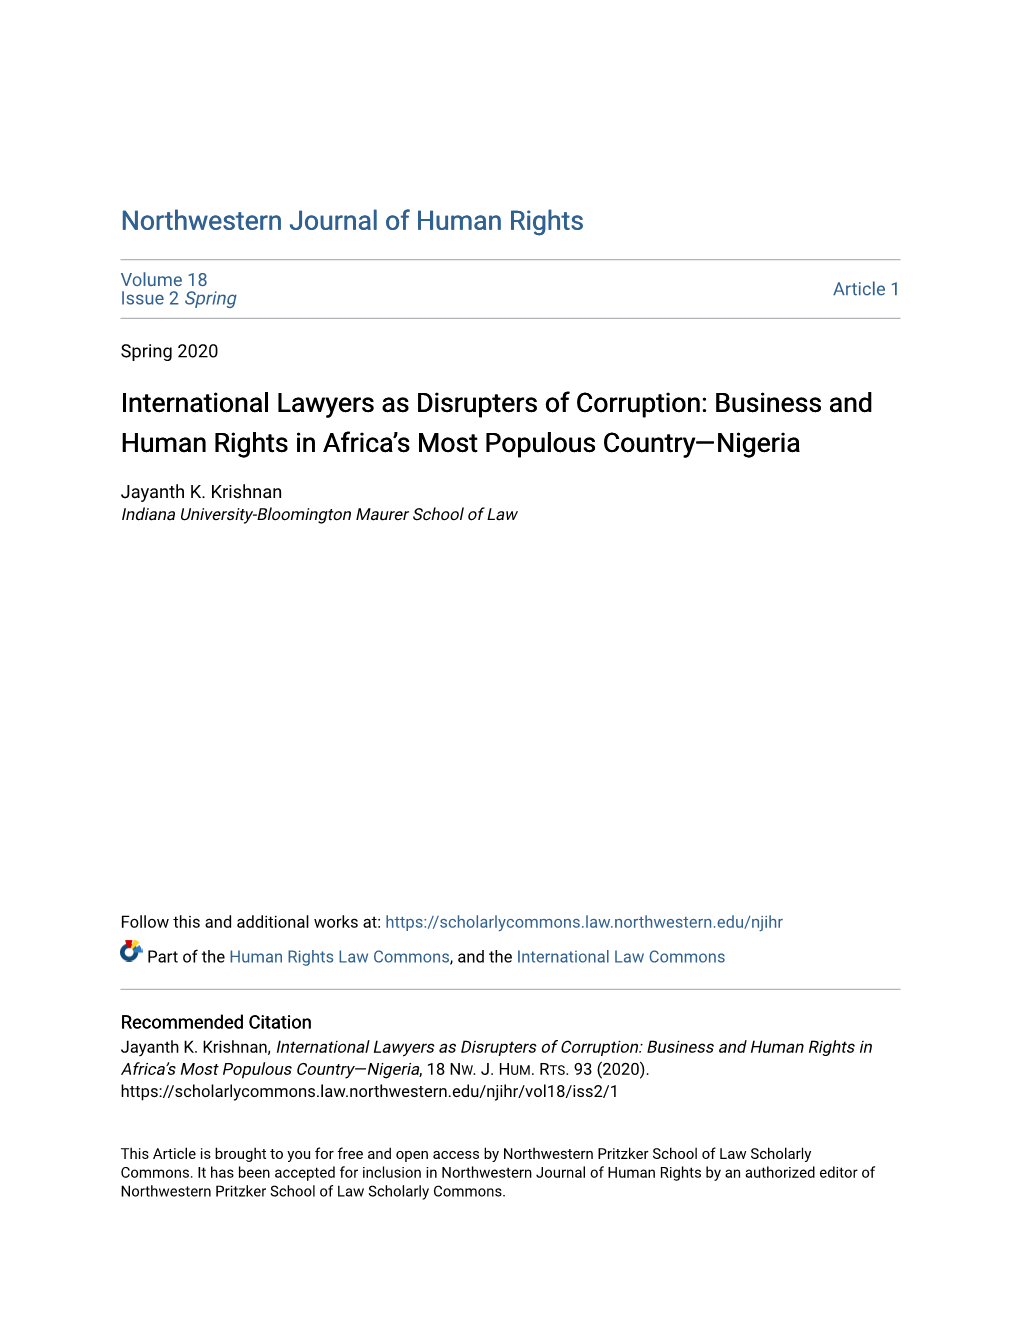 International Lawyers As Disrupters of Corruption: Business and Human Rights in Africa’S Most Populous Country—Nigeria